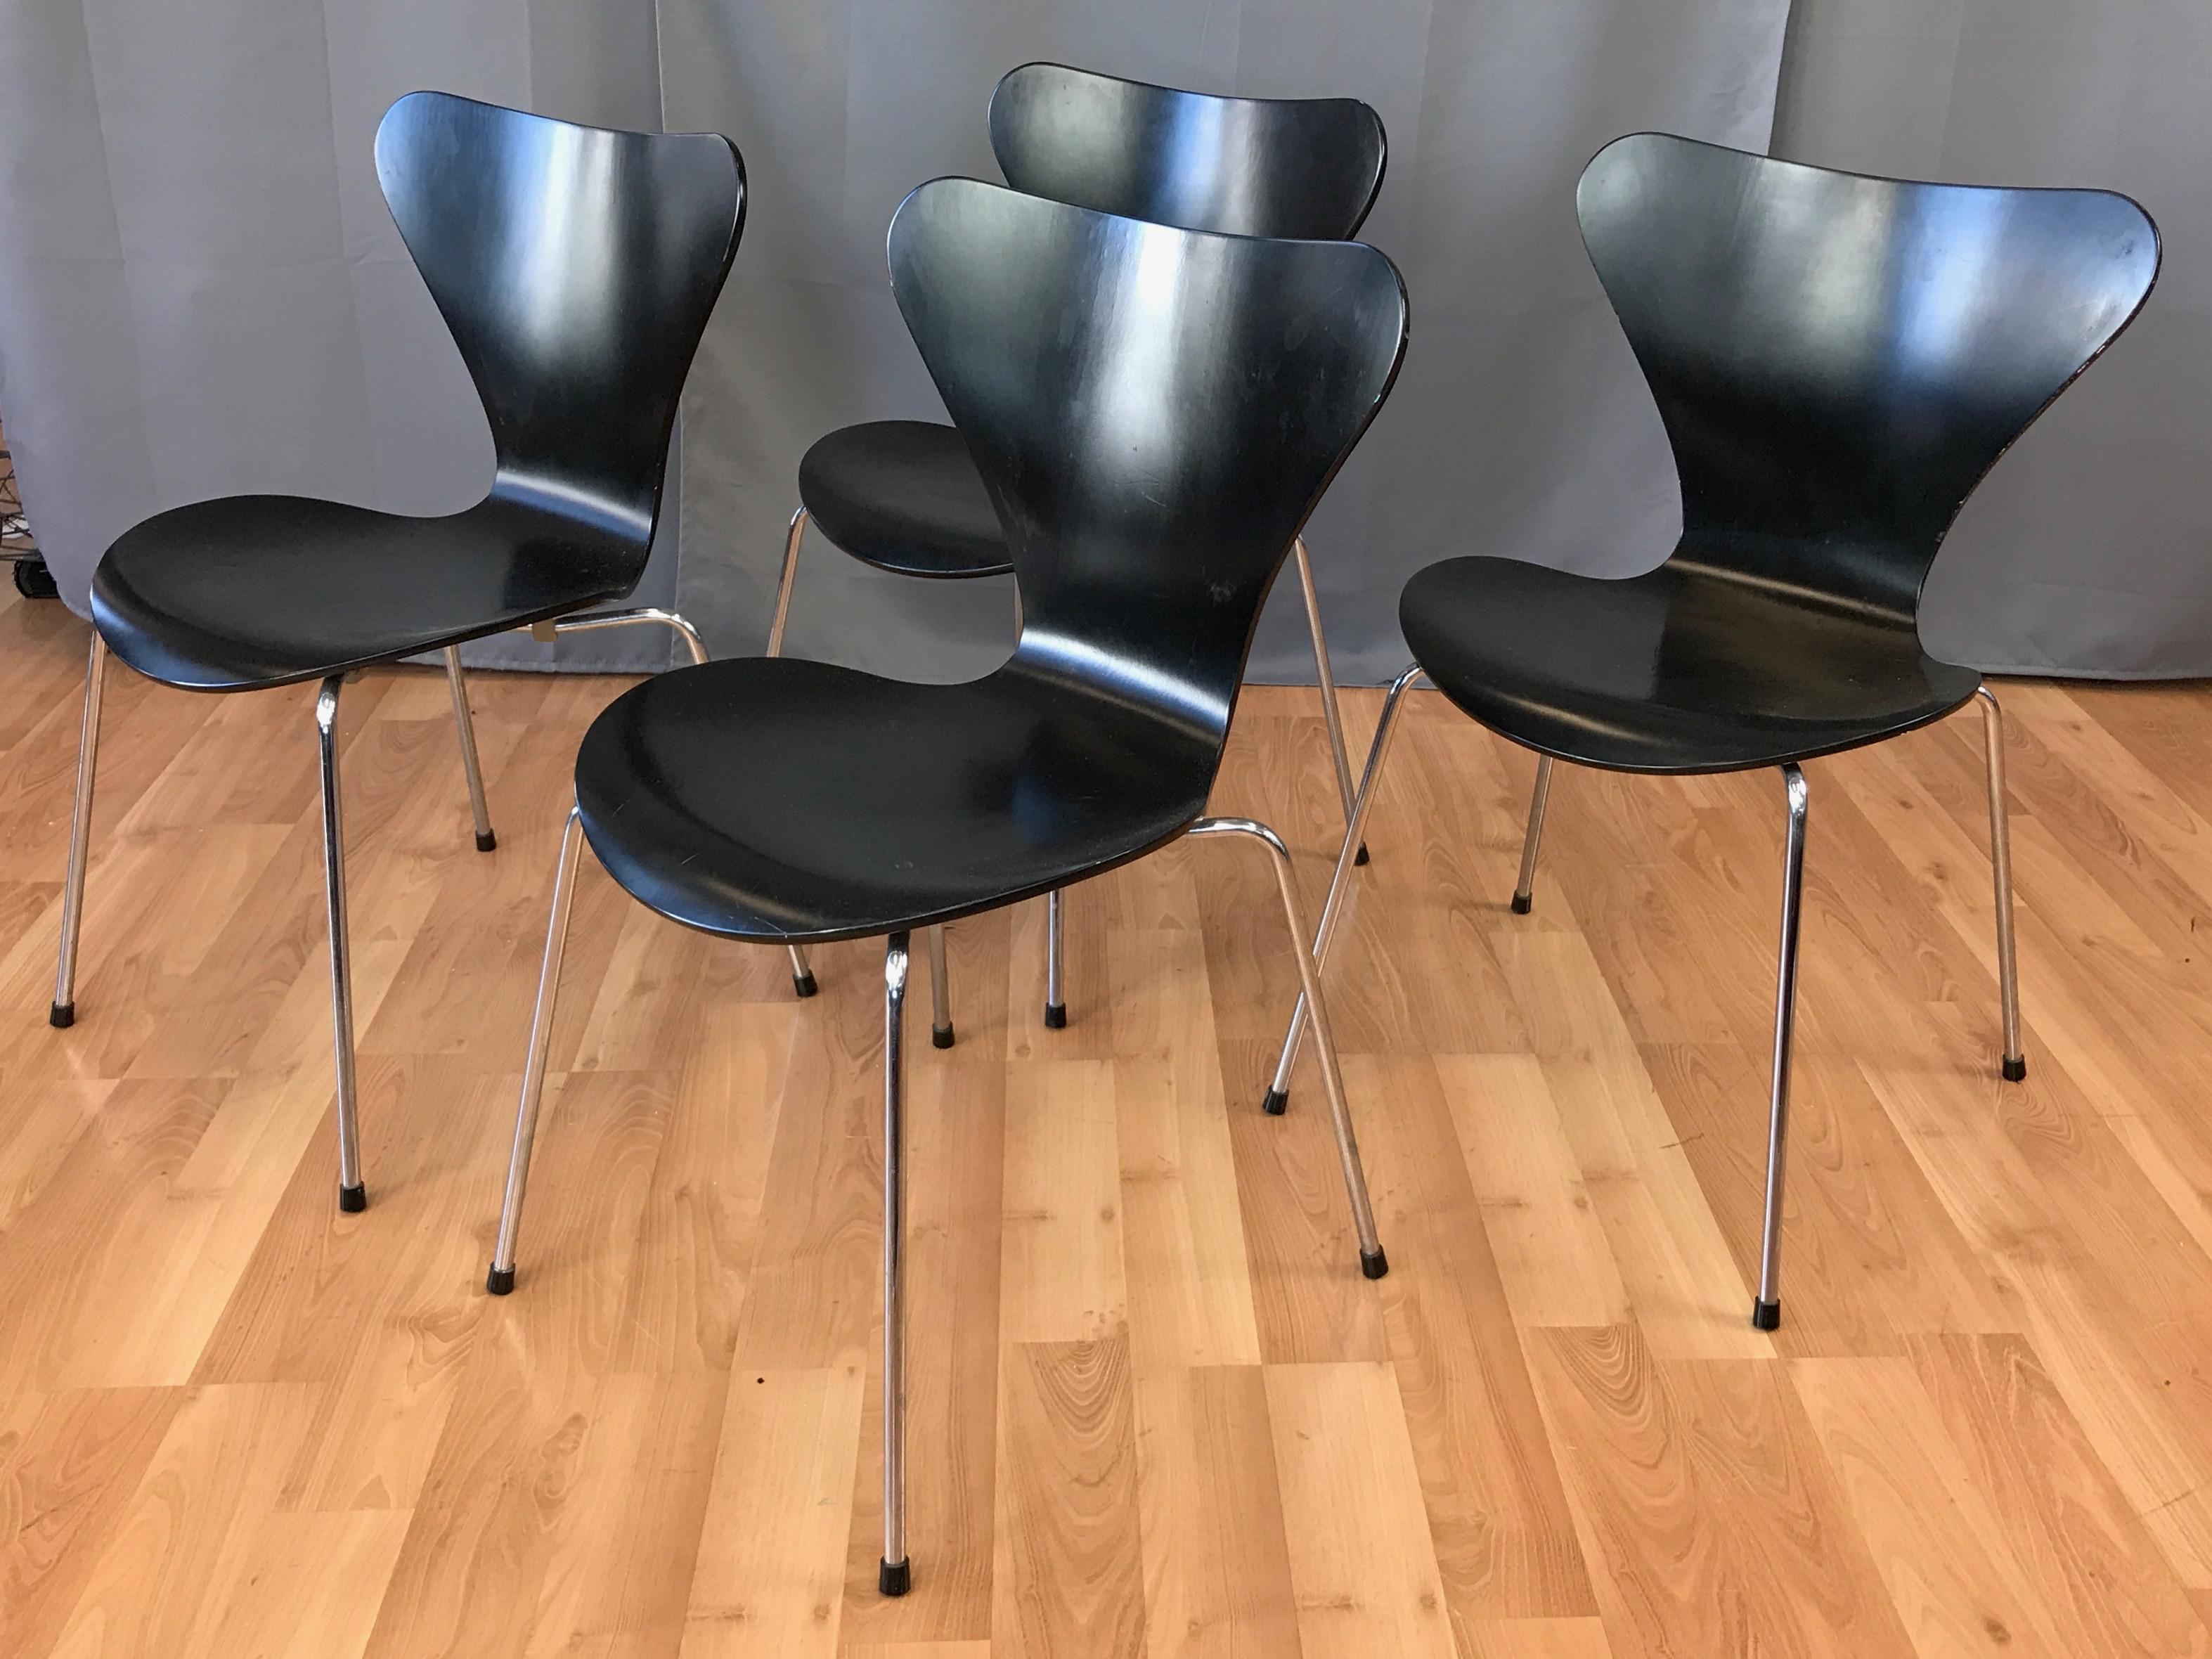 A set of four series 7 model 3107 stackable black lacquered side chairs designed by Arne Jacobsen for Fritz Hansen.

Instantly iconic upon their introduction in 1955, with this particular set having been produced in 1993. Comfortable bentwood seat